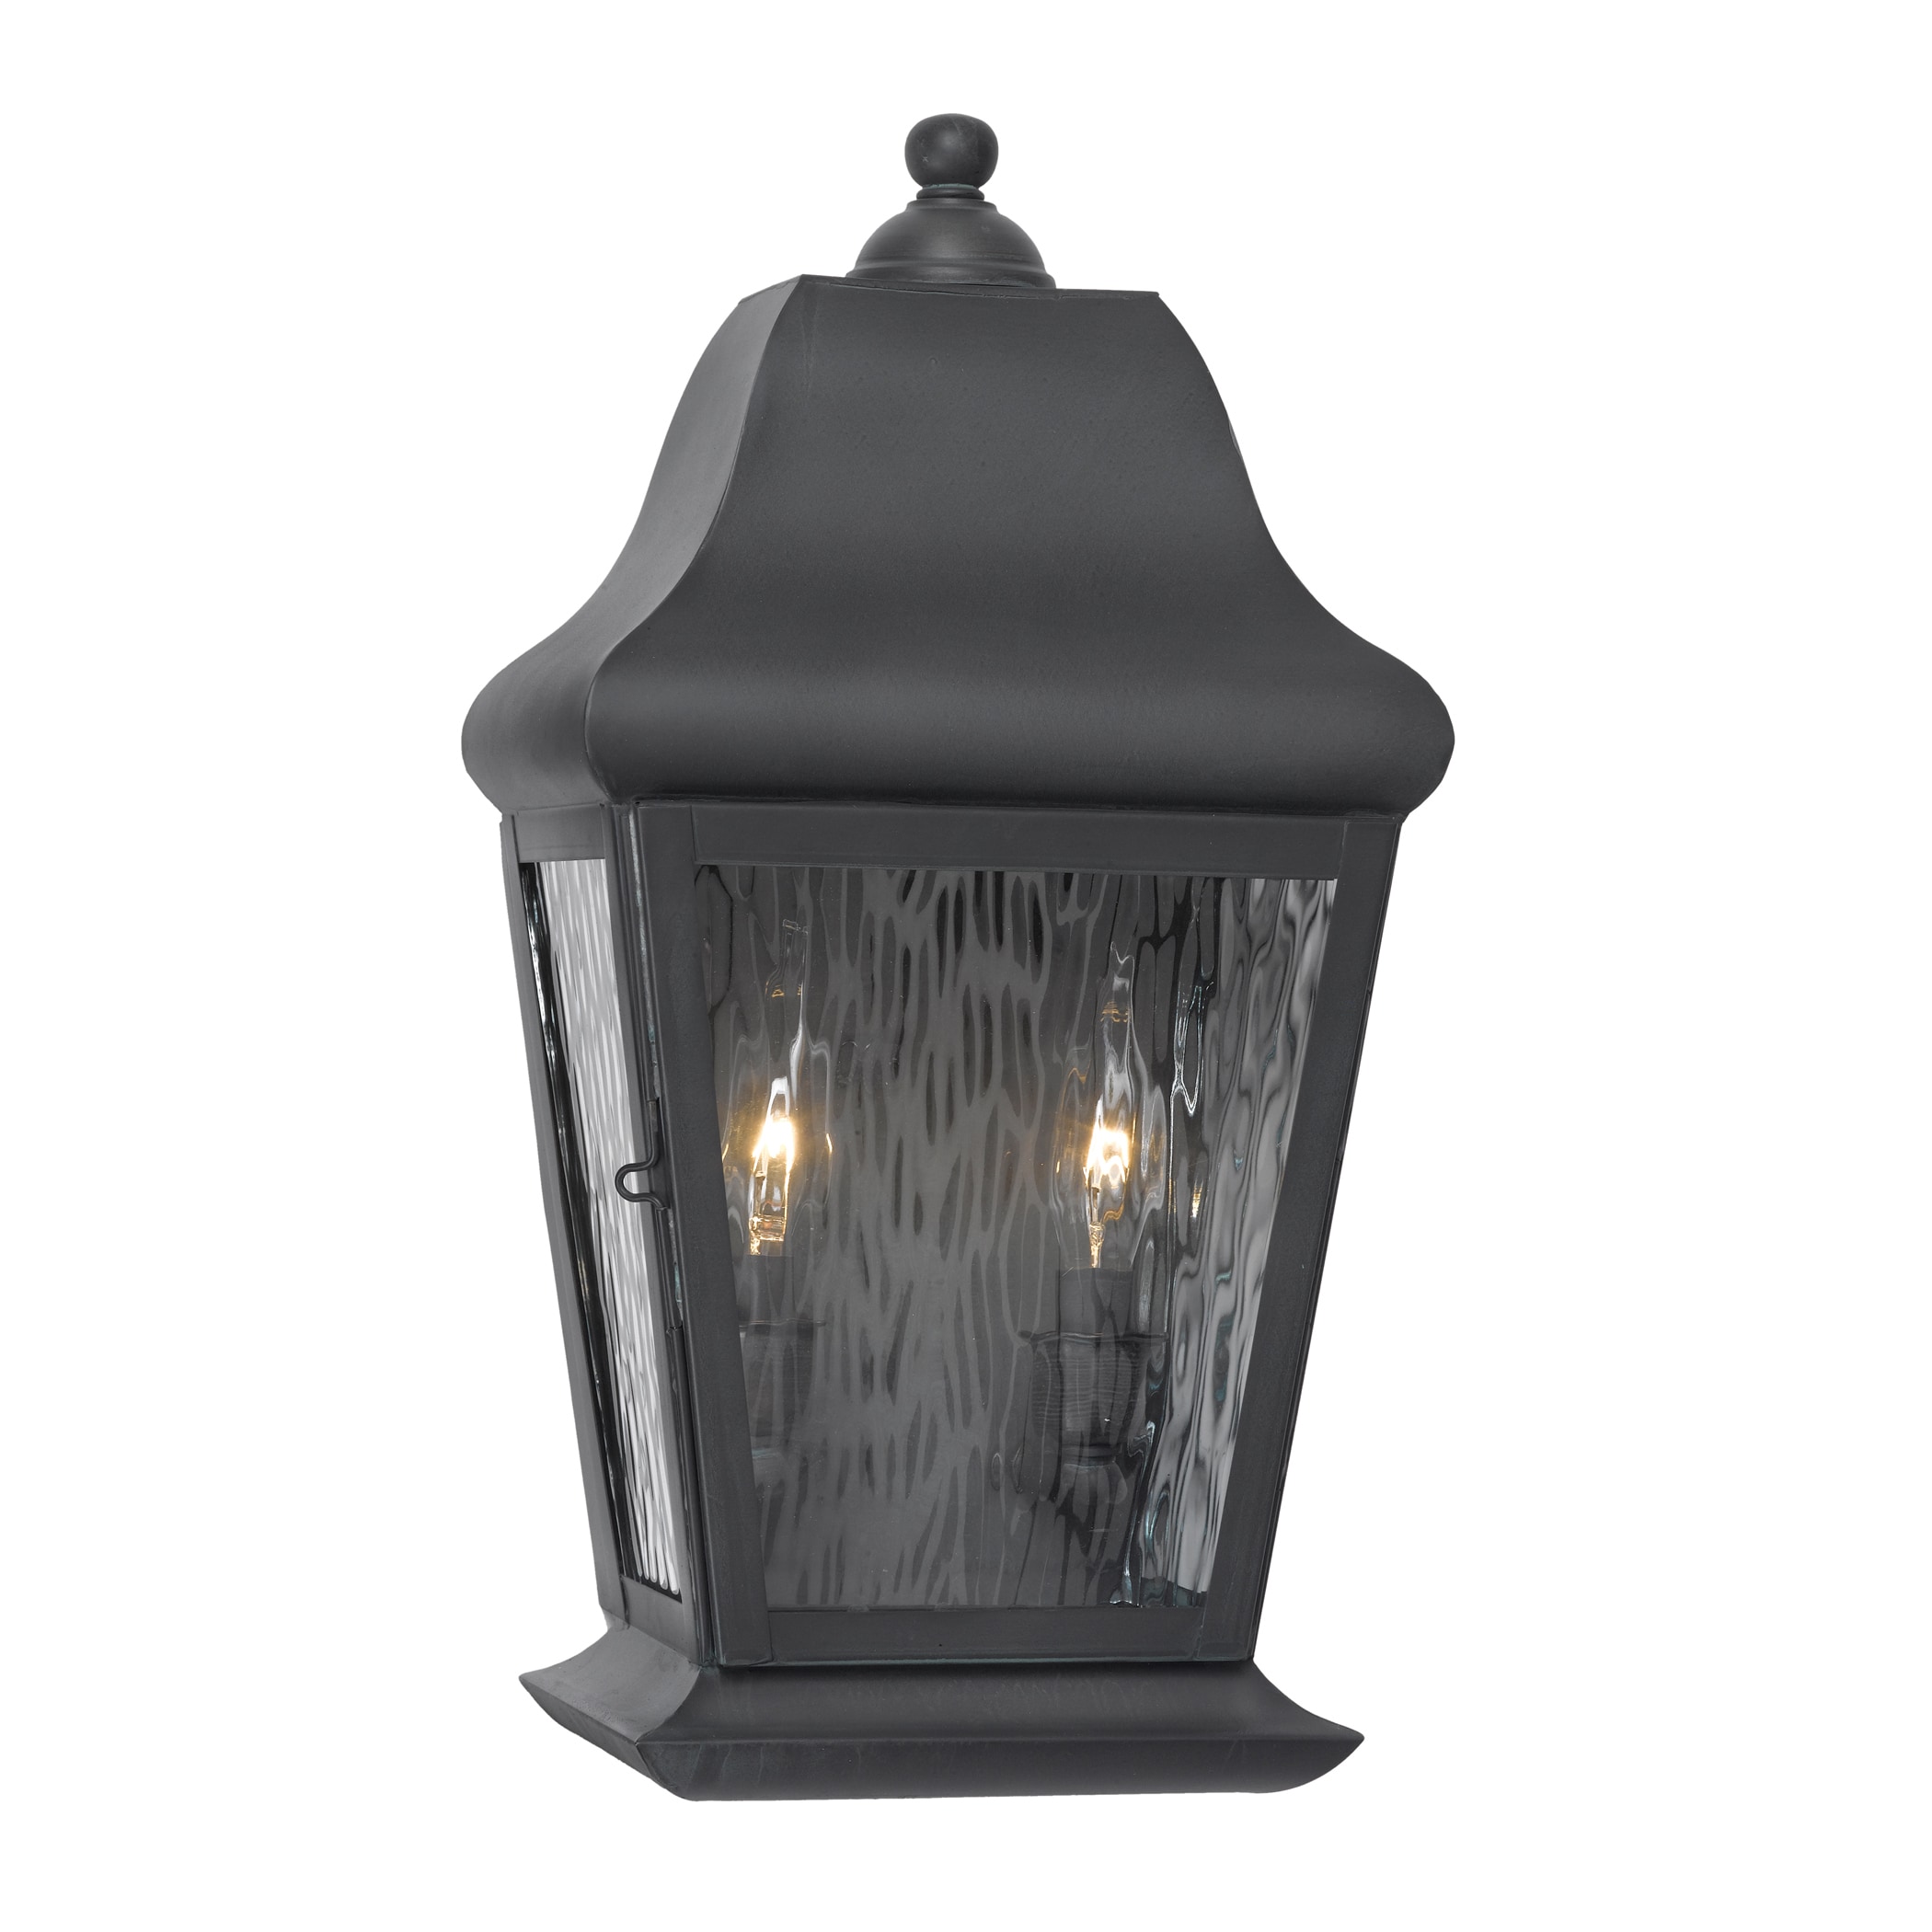 Belmont Charcoal Solid Brass Transitional 2 light Outdoor Lantern